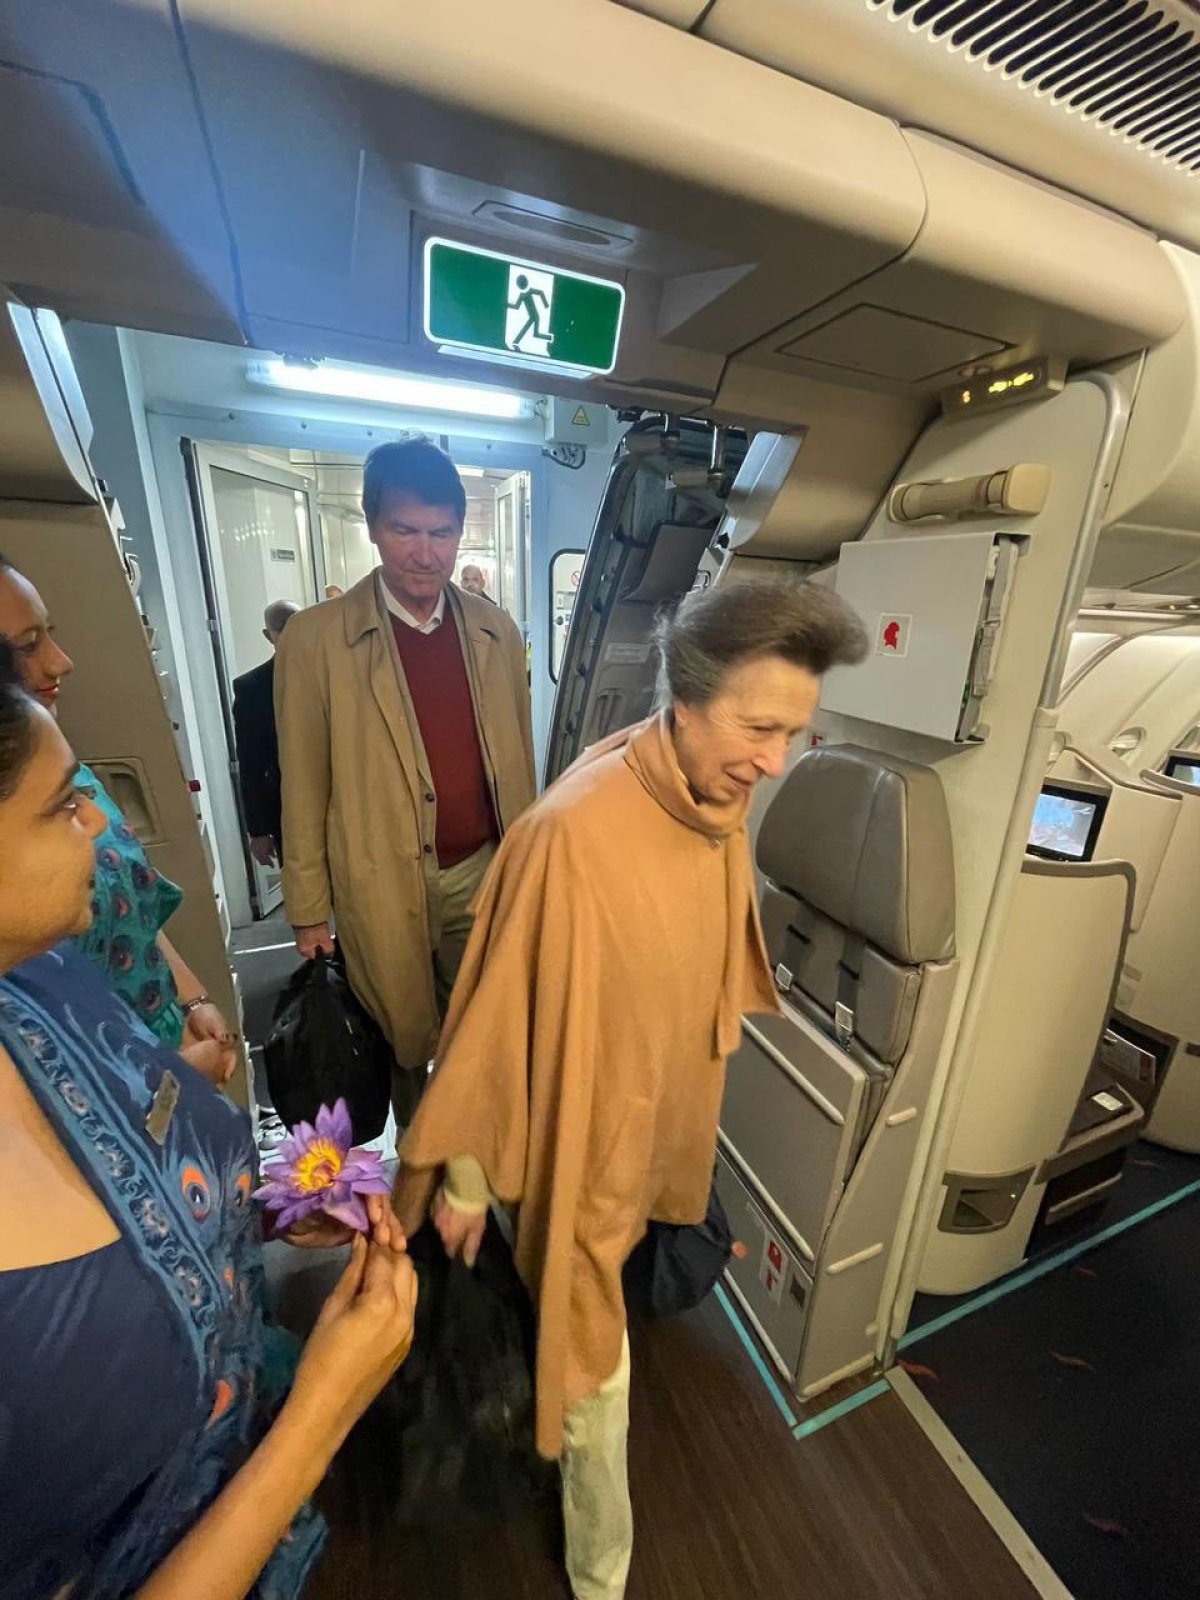 Her Royal Highness Princess Anne Arrives in Sri Lanka: Royal Visit Marks 75 Years of Diplomatic Ties Between the UK and Sri Lanka